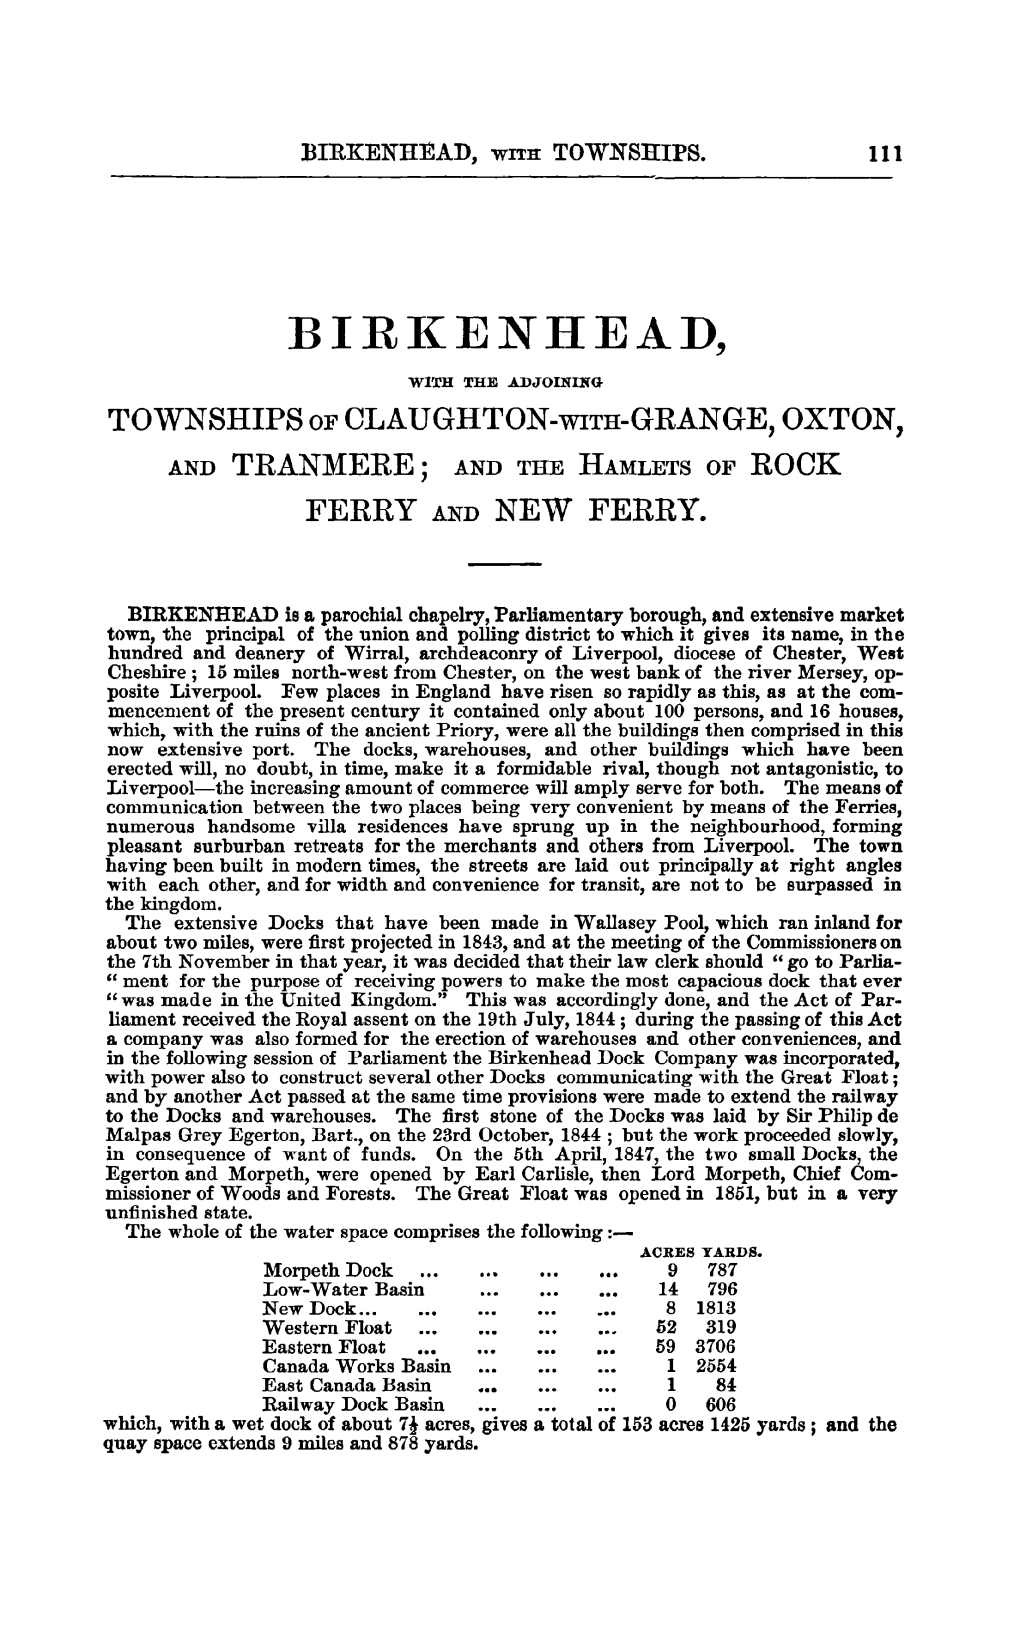 TOWNSHIPS of CLAUGHTON-WITH-GRANGE, OXTON, and TRANMERE; and the HAMLETS of ROCK FERRY and NEW FERRY